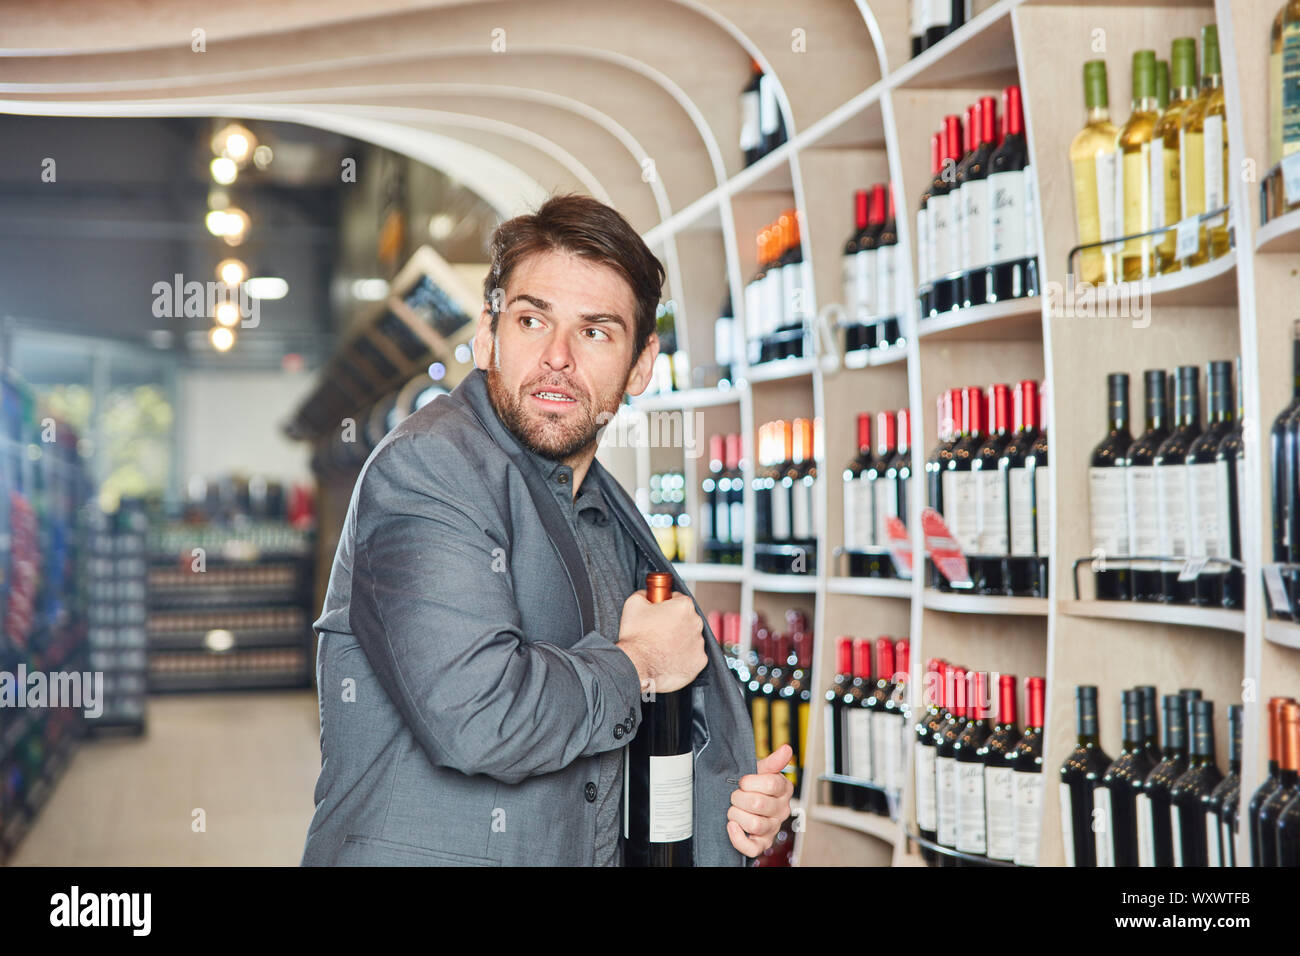 Young man puts a bottle of wine in his jacket during shoplifting Stock Photo